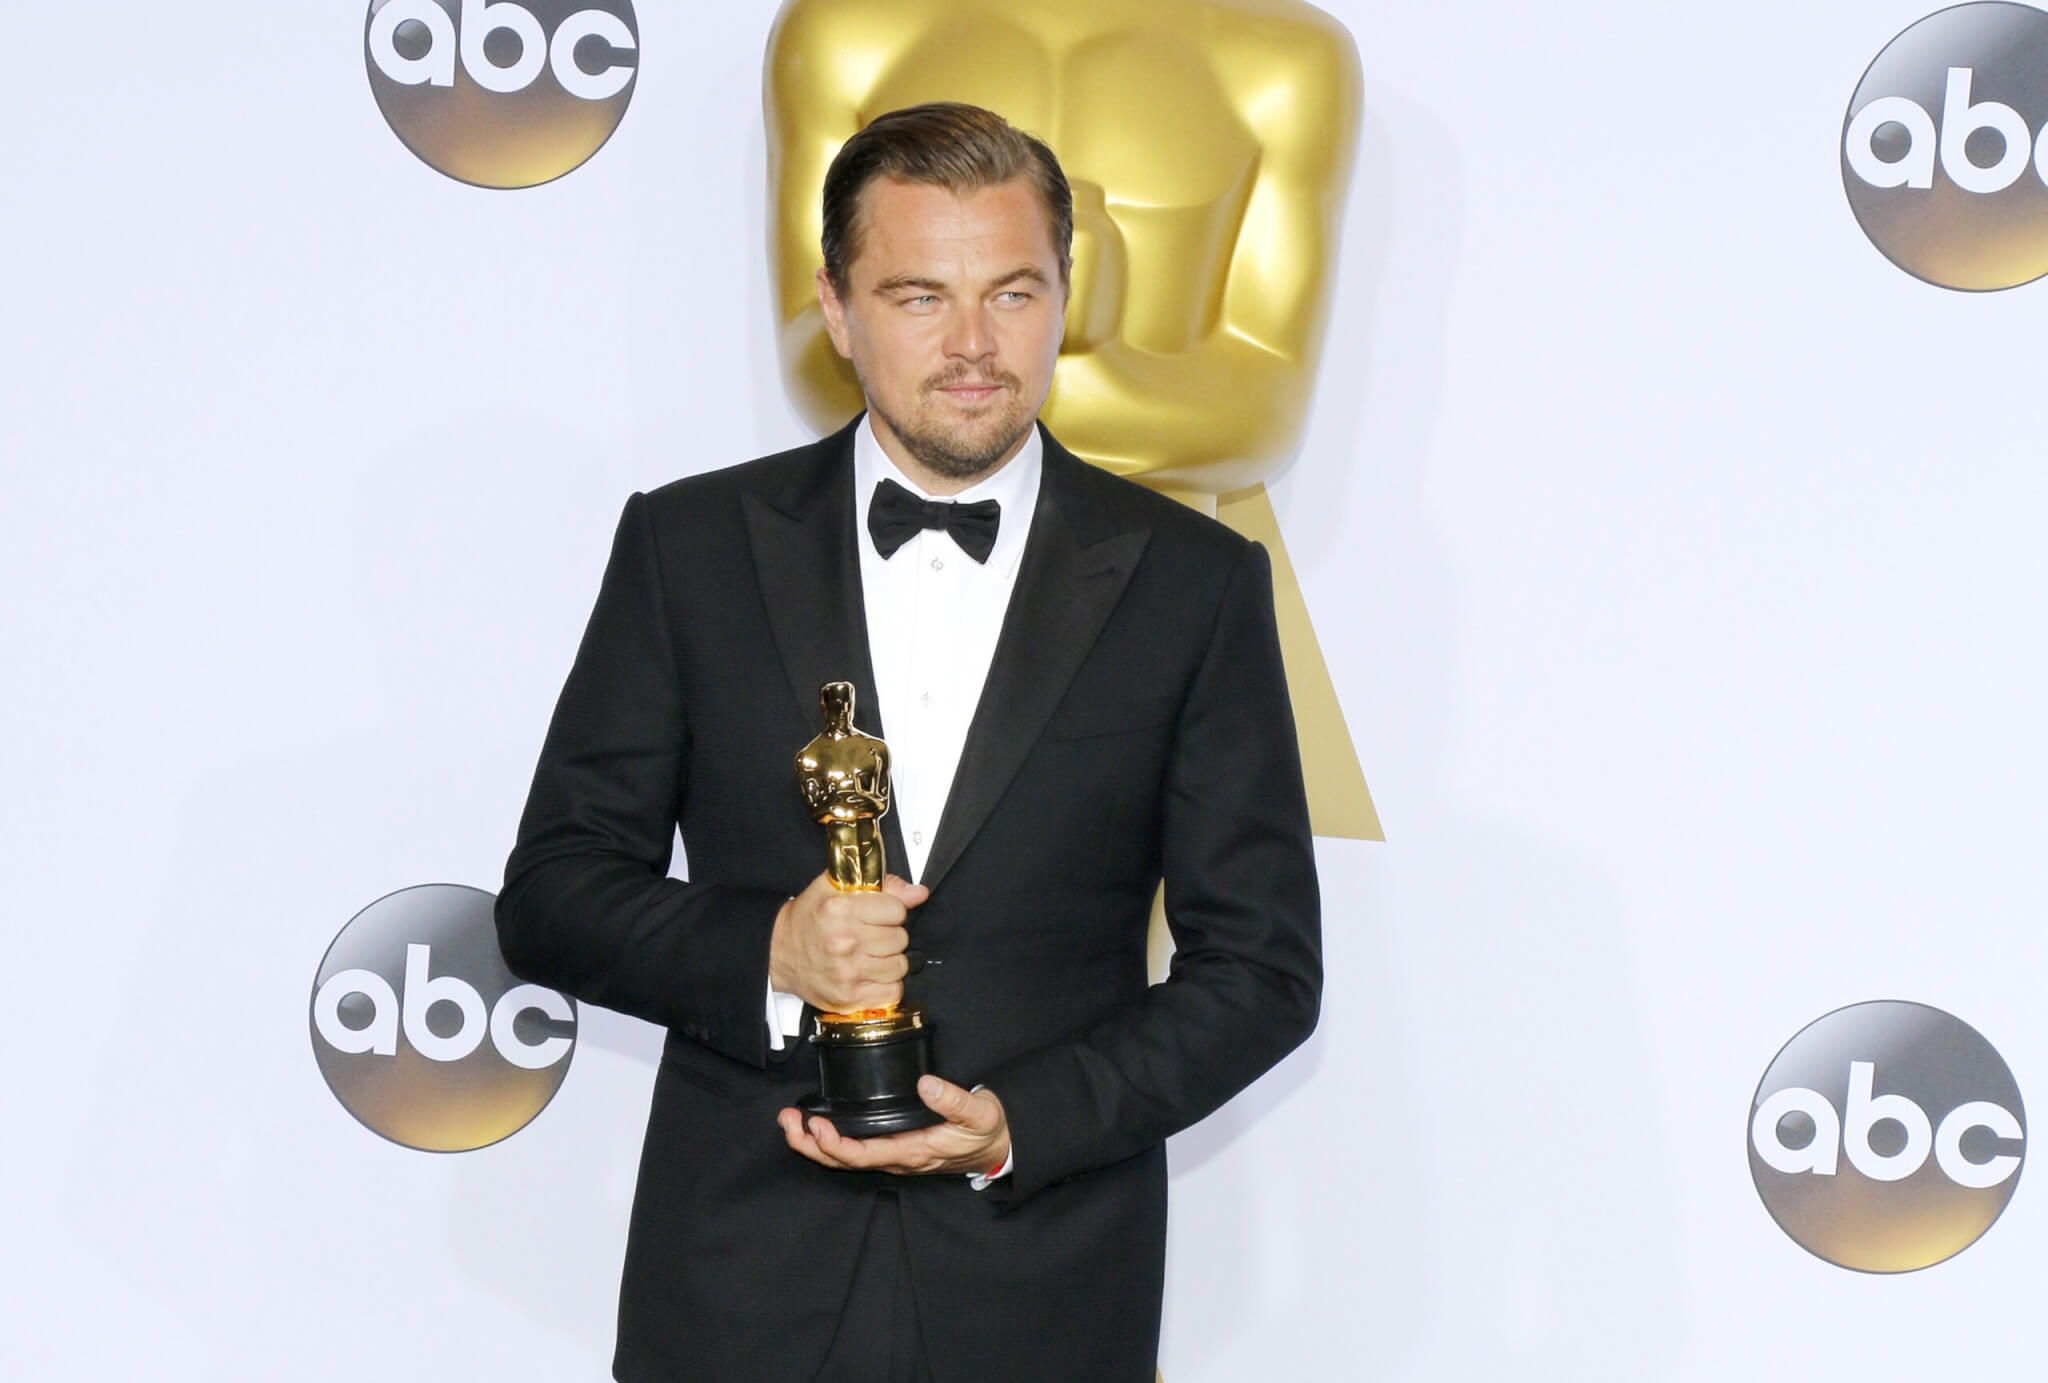 Leonardo DiCaprio at the 88th Annual Academy Awards in 2016